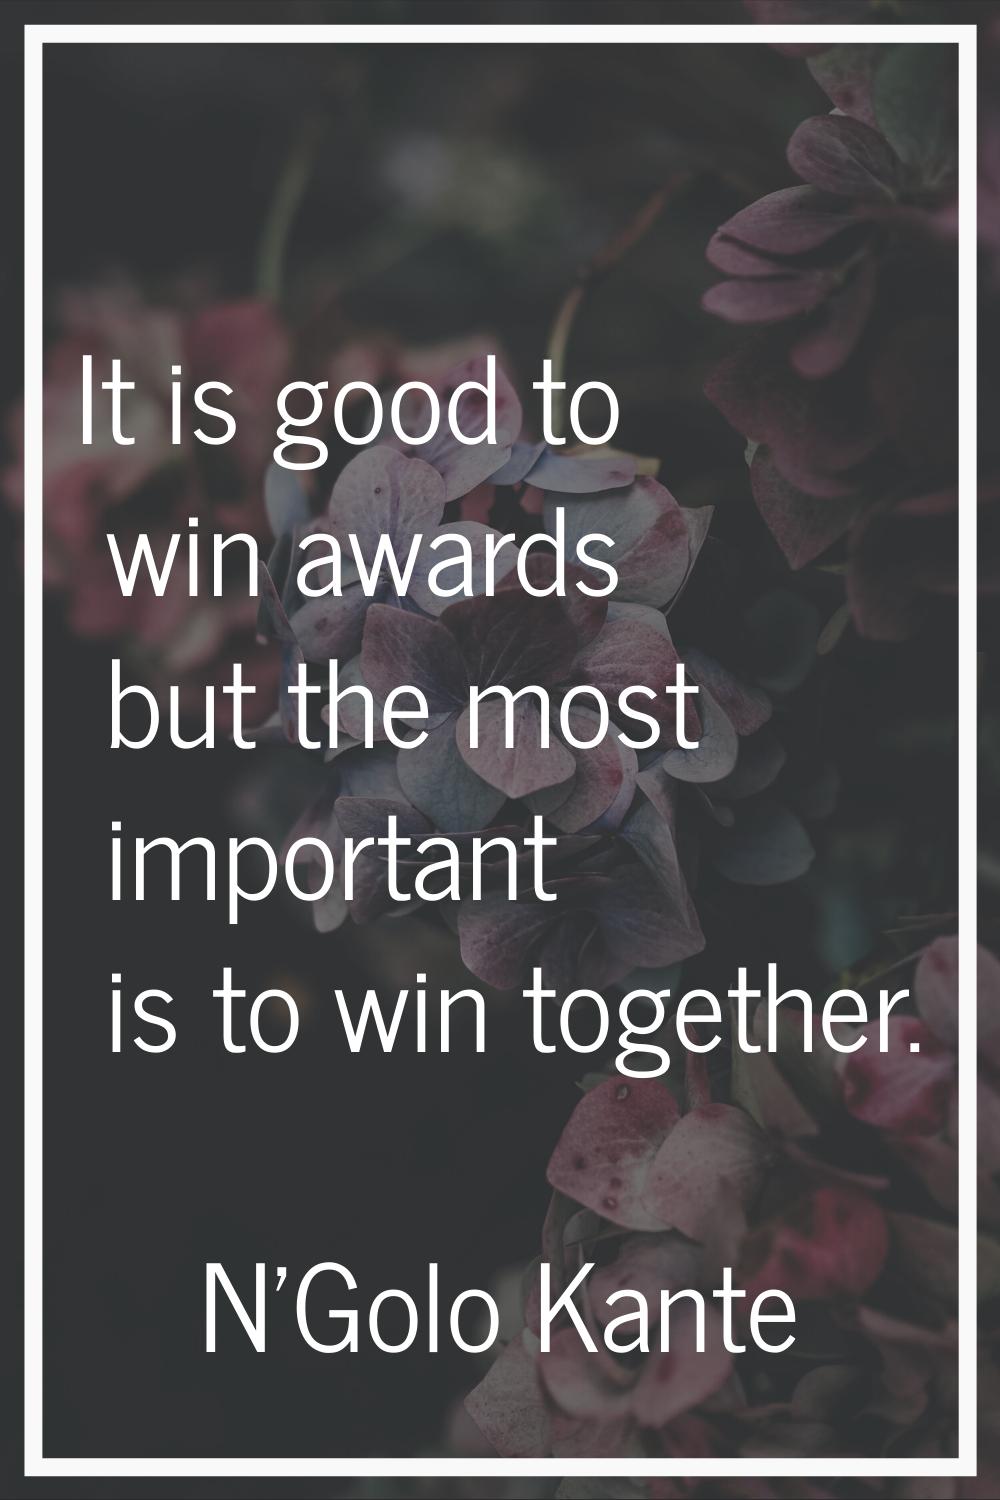 It is good to win awards but the most important is to win together.